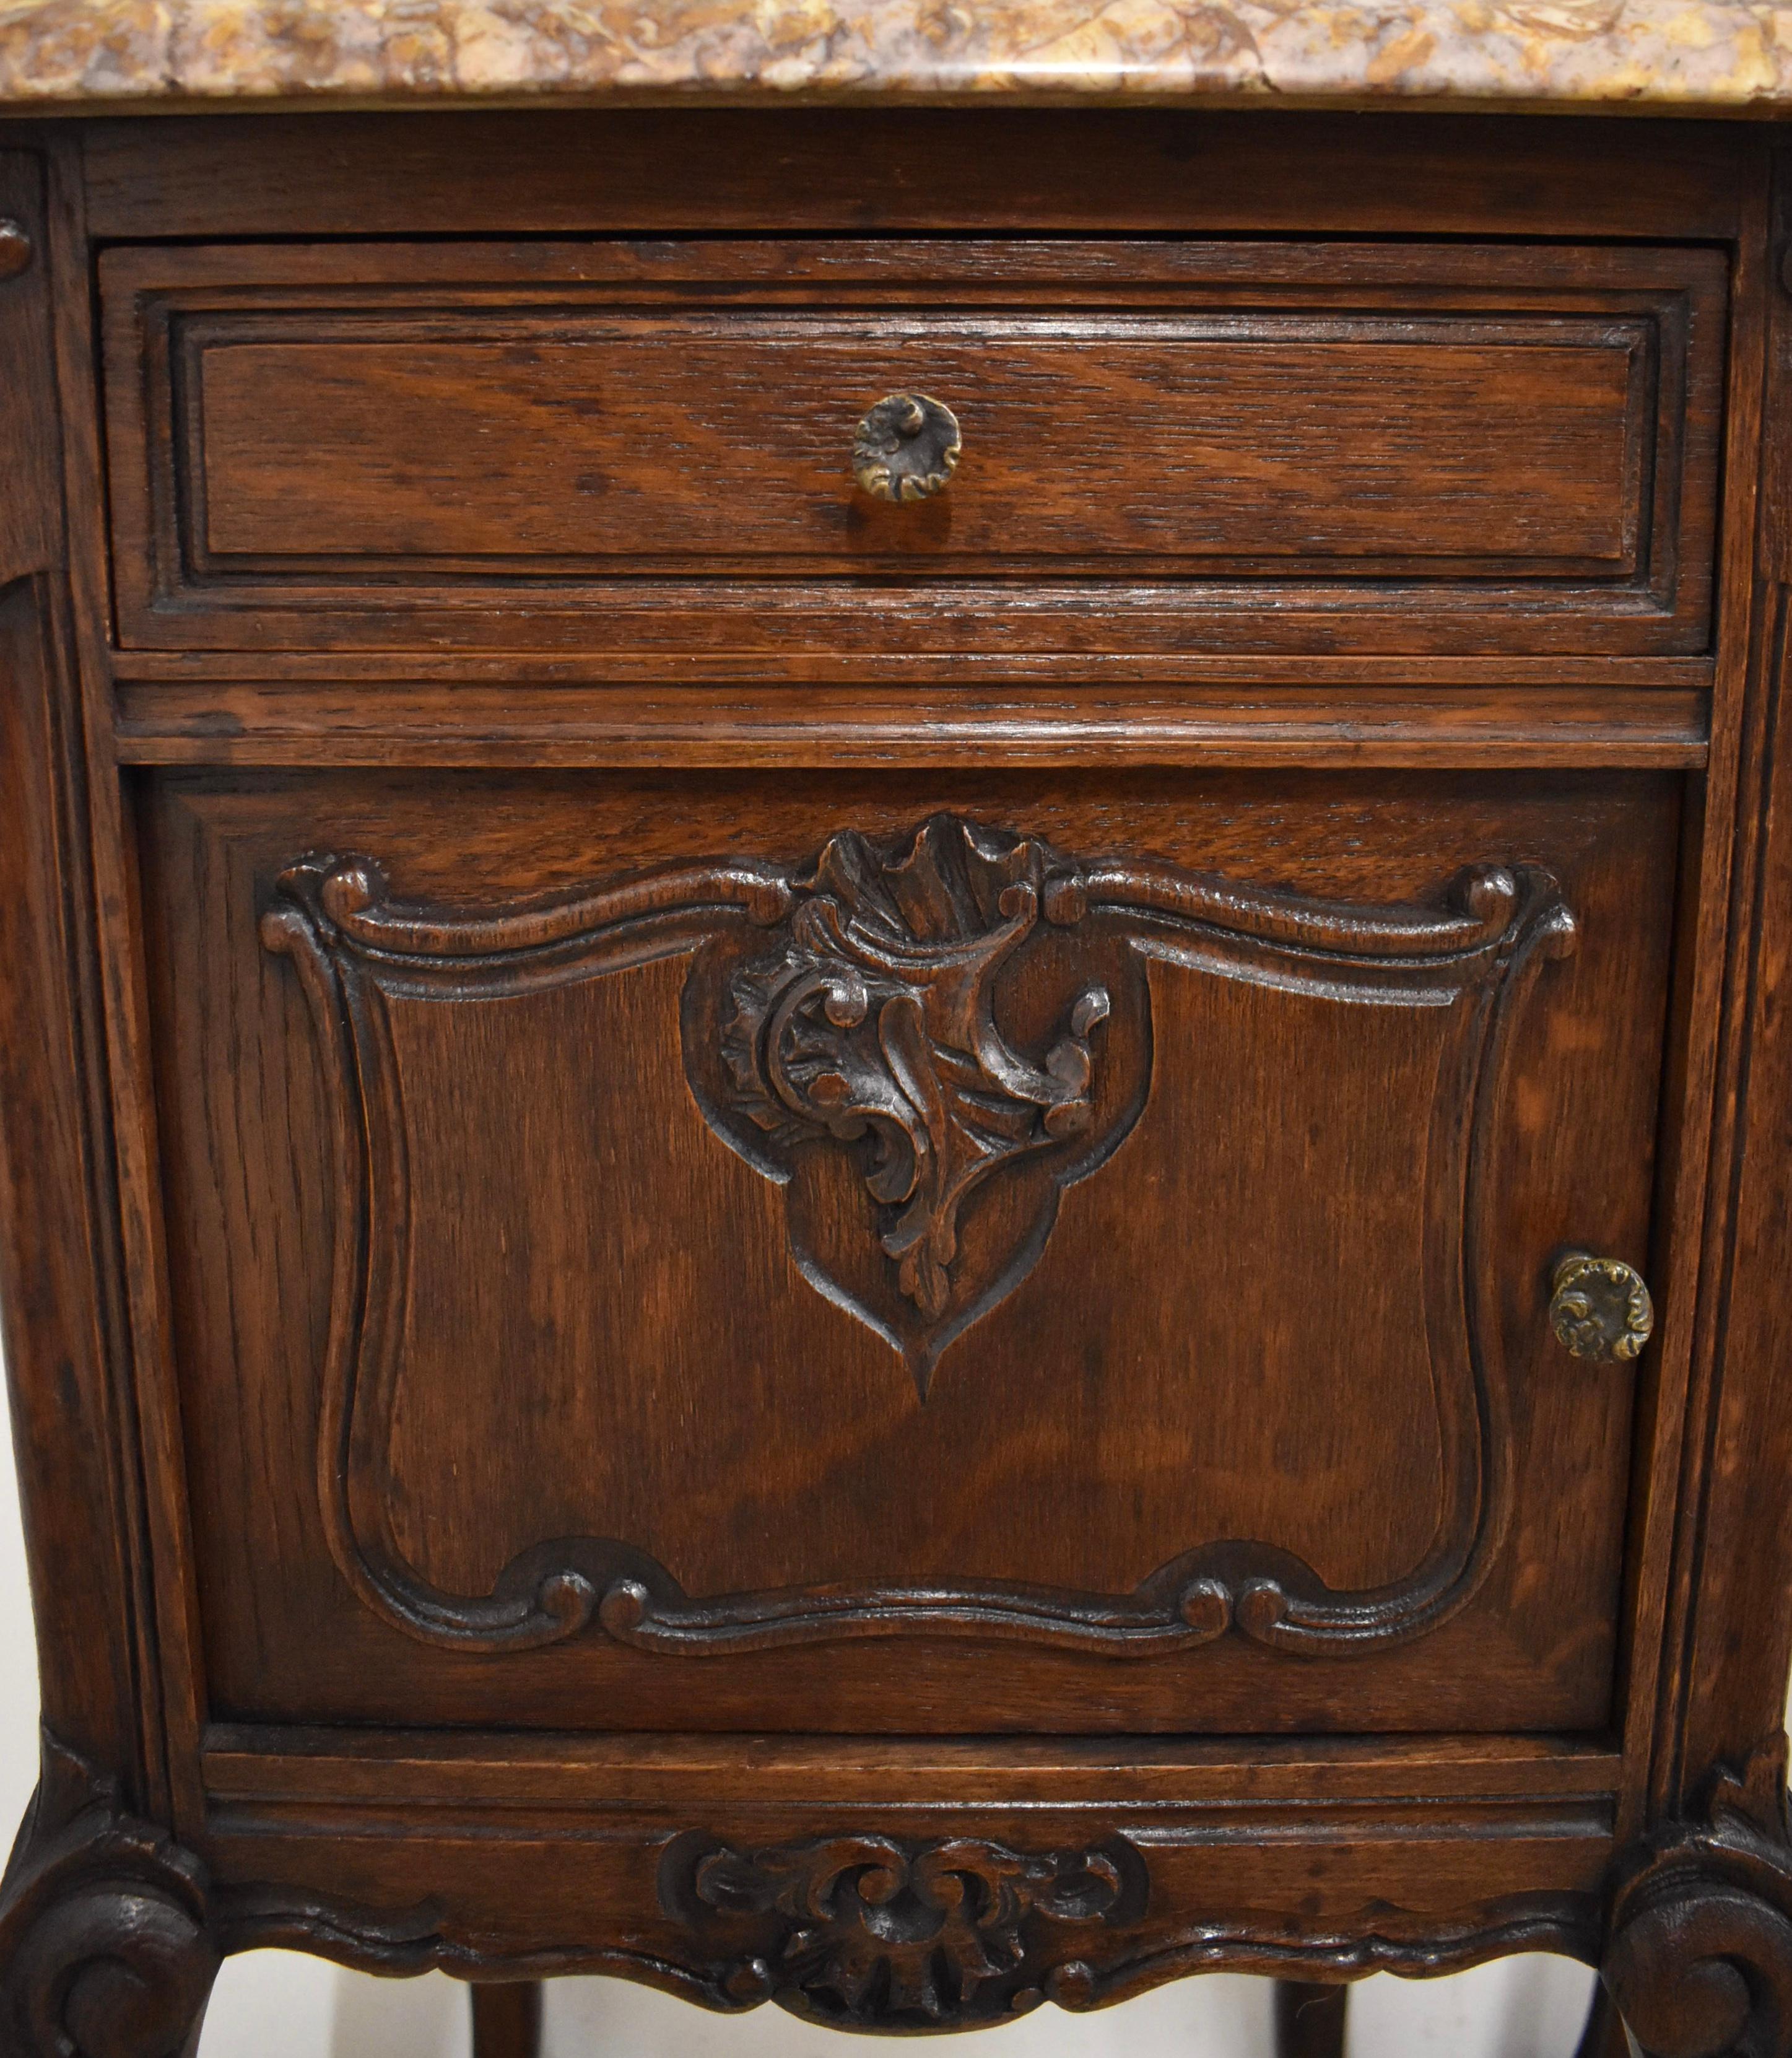 20th Century Pair of Carved Oak Nightstand Bedside Tables with Mable Tops, Circa 1900 For Sale